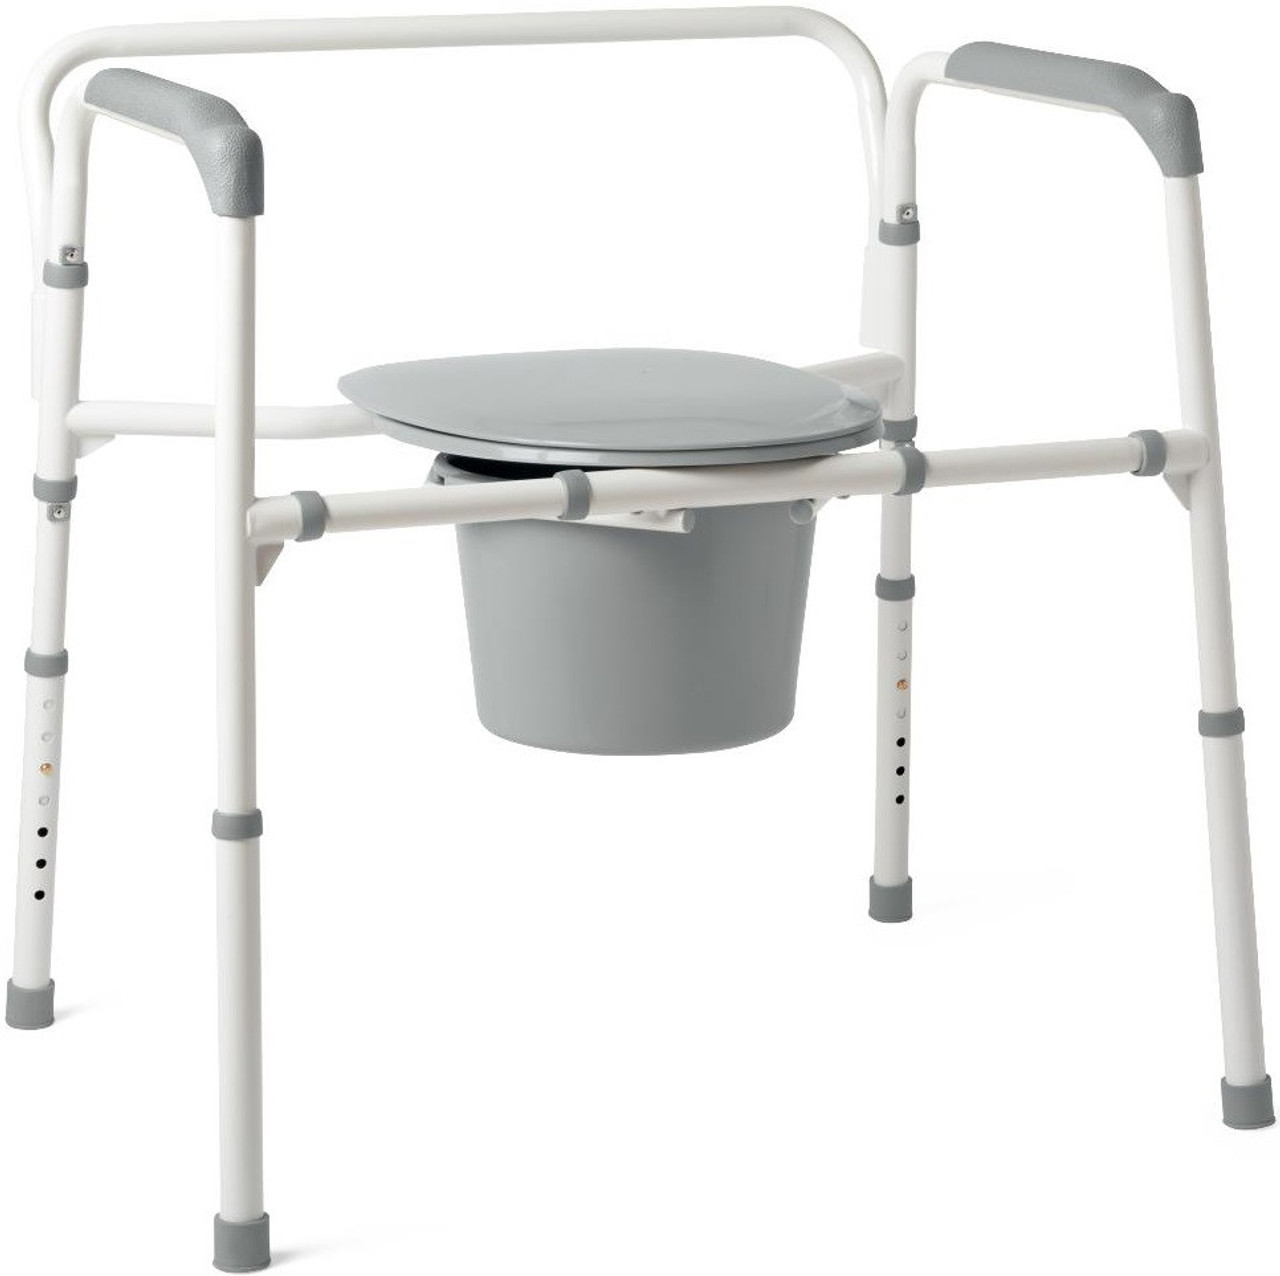 Guardian Commode Seat & Lid - G222-0843